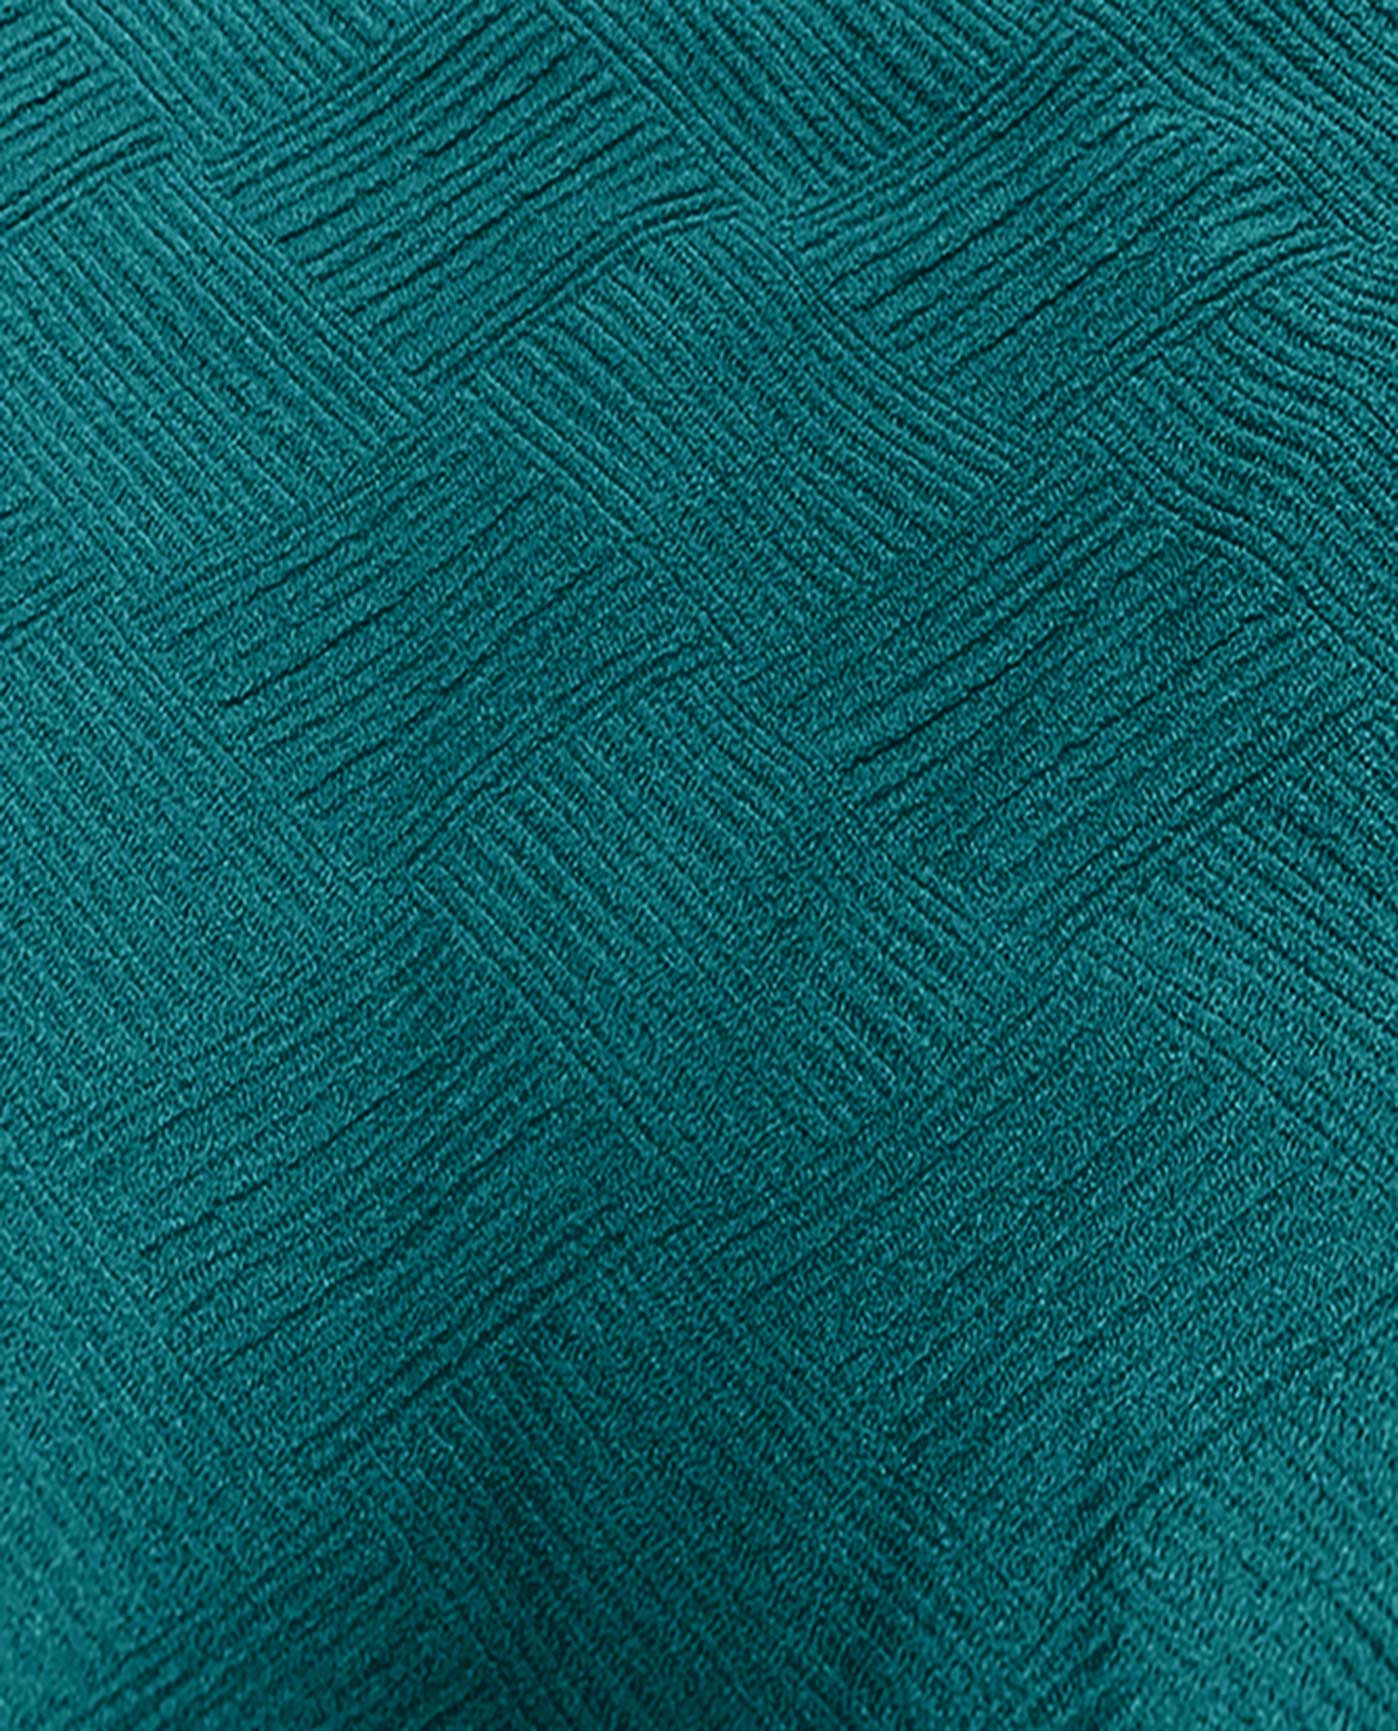 FABRIC SWATCH VIEW OF CHLORINE RESISTANT AQUAMORE SOLID SIGNATURE TEXTURED HIGH NECK PLUS SIZE SWIMSUIT | 010 AQS SIGNATURE DEEP OCEAN